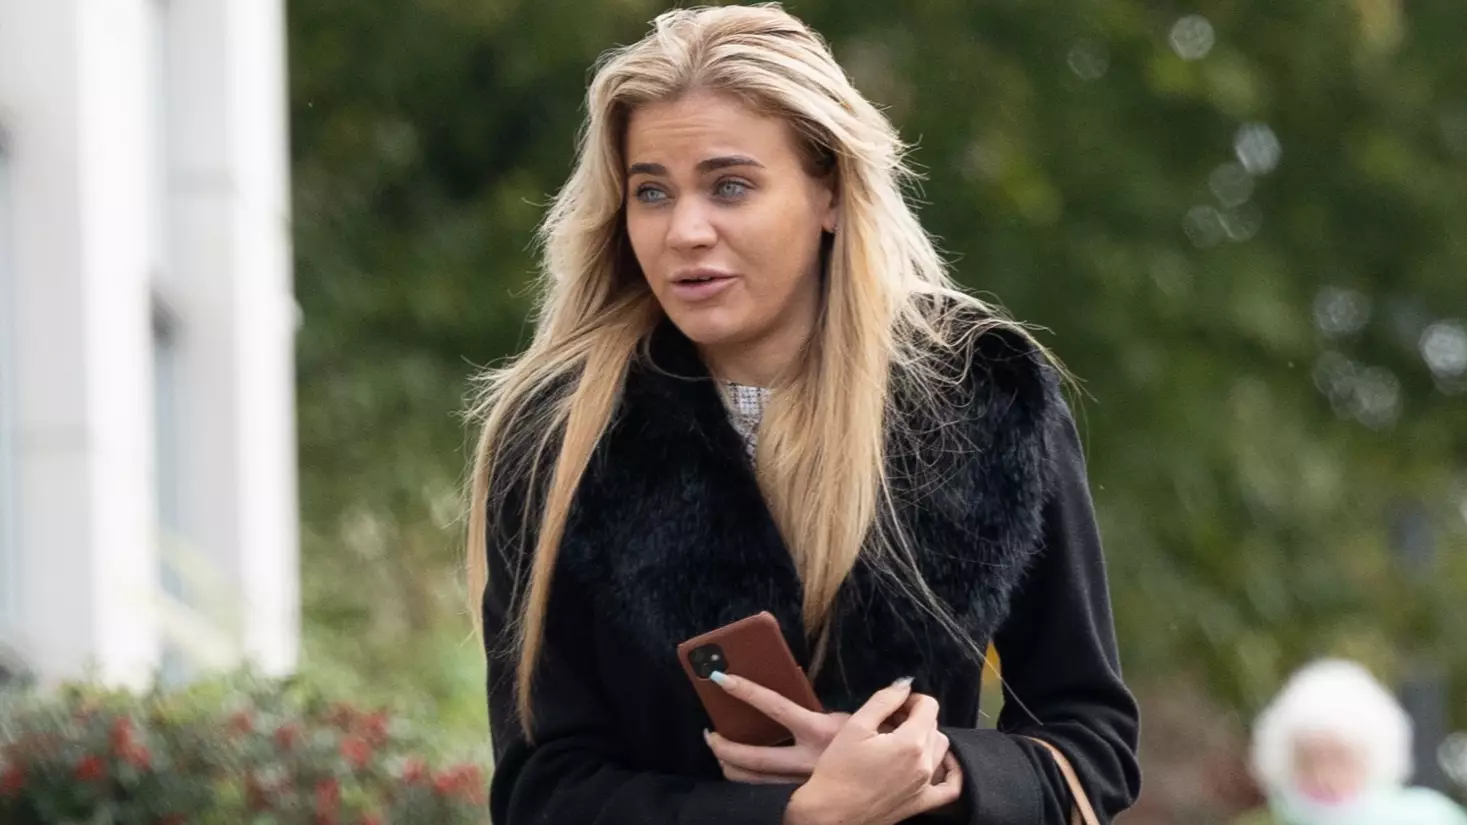 Drink-Driving Socialite, 24, Begs Judge Not To Ban Her 'As She'd Have To Use Public Transport'